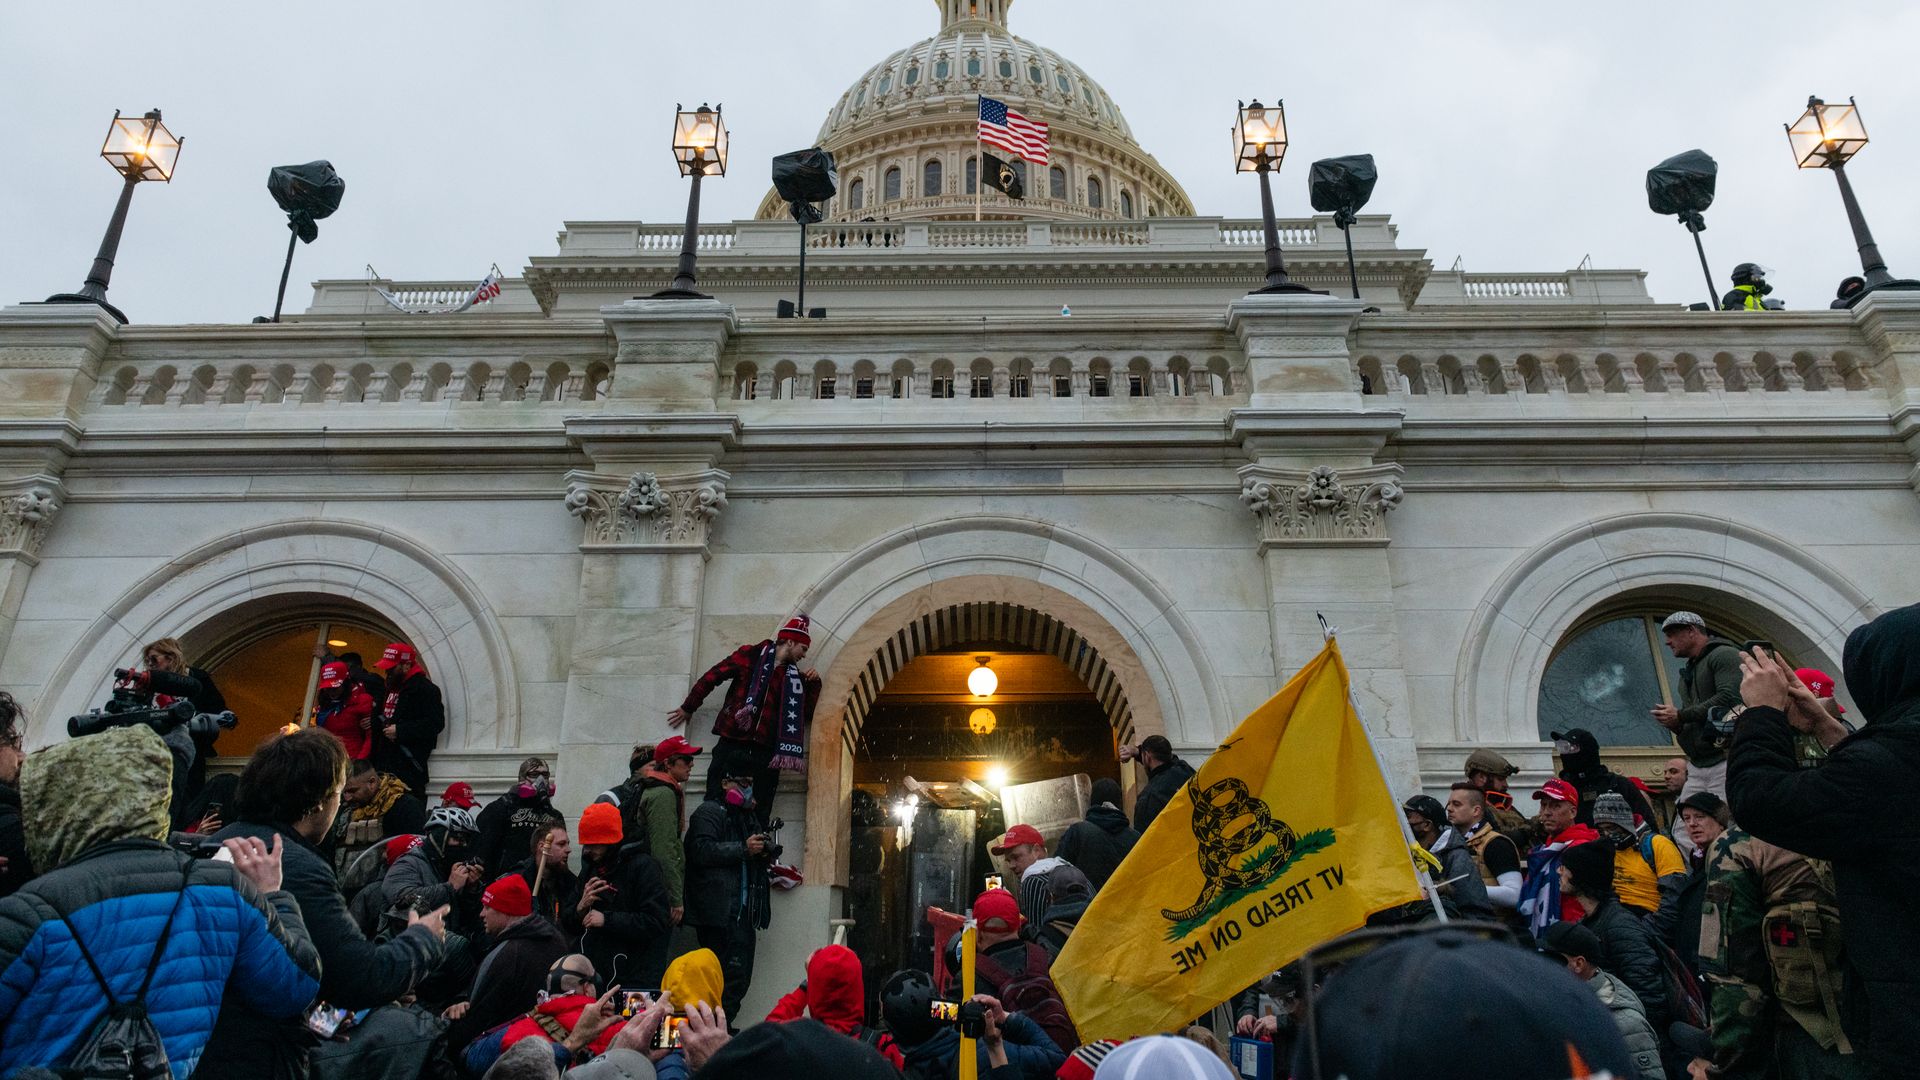 Photo of Trump supporters crowding an entry into the Capitol building during the Jan. 6 riots